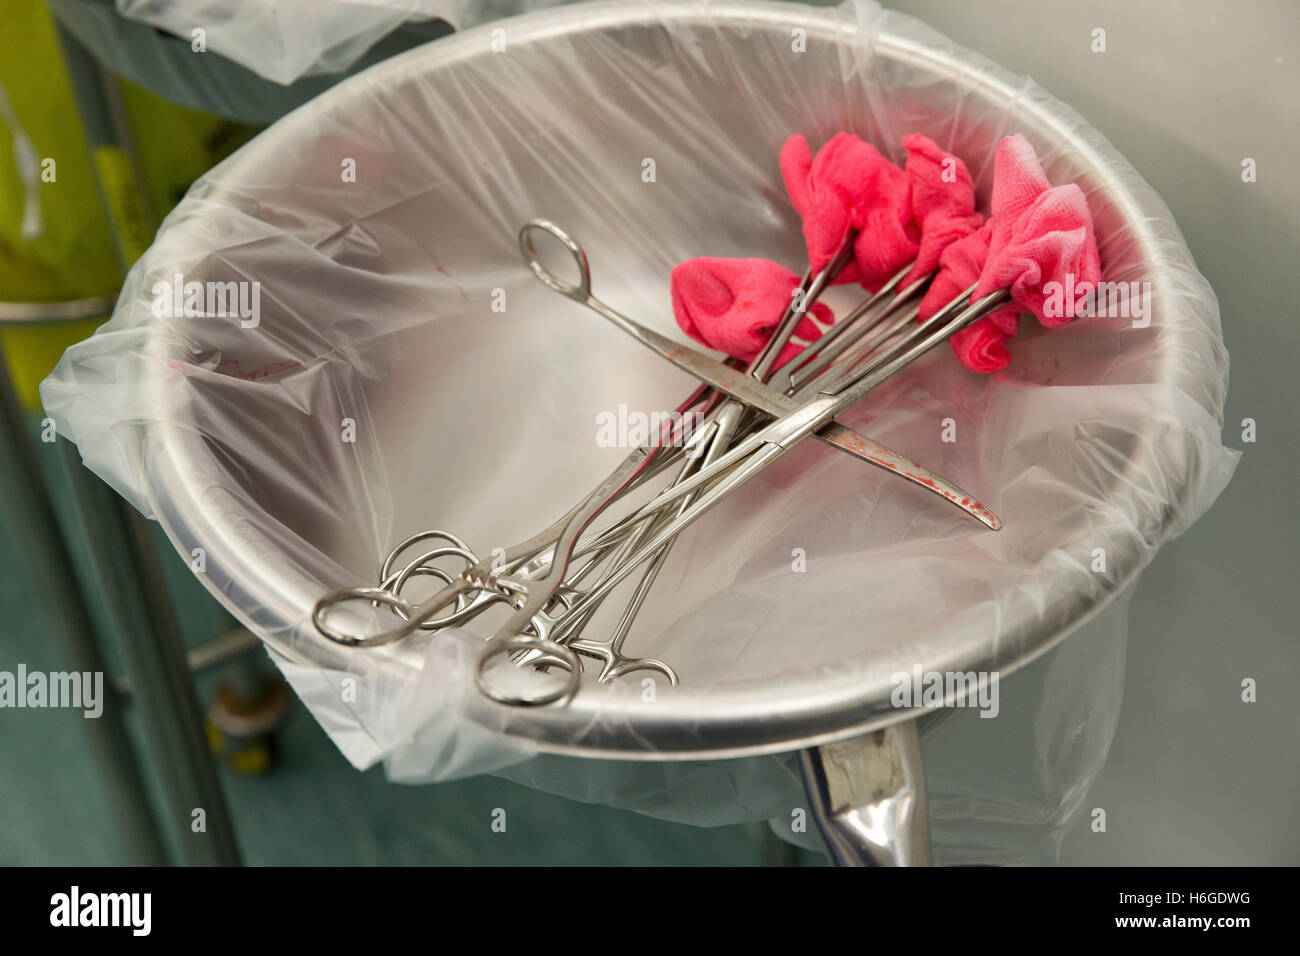 A detail of used surgical swabs in a dish at an operating theatre Stock Photo